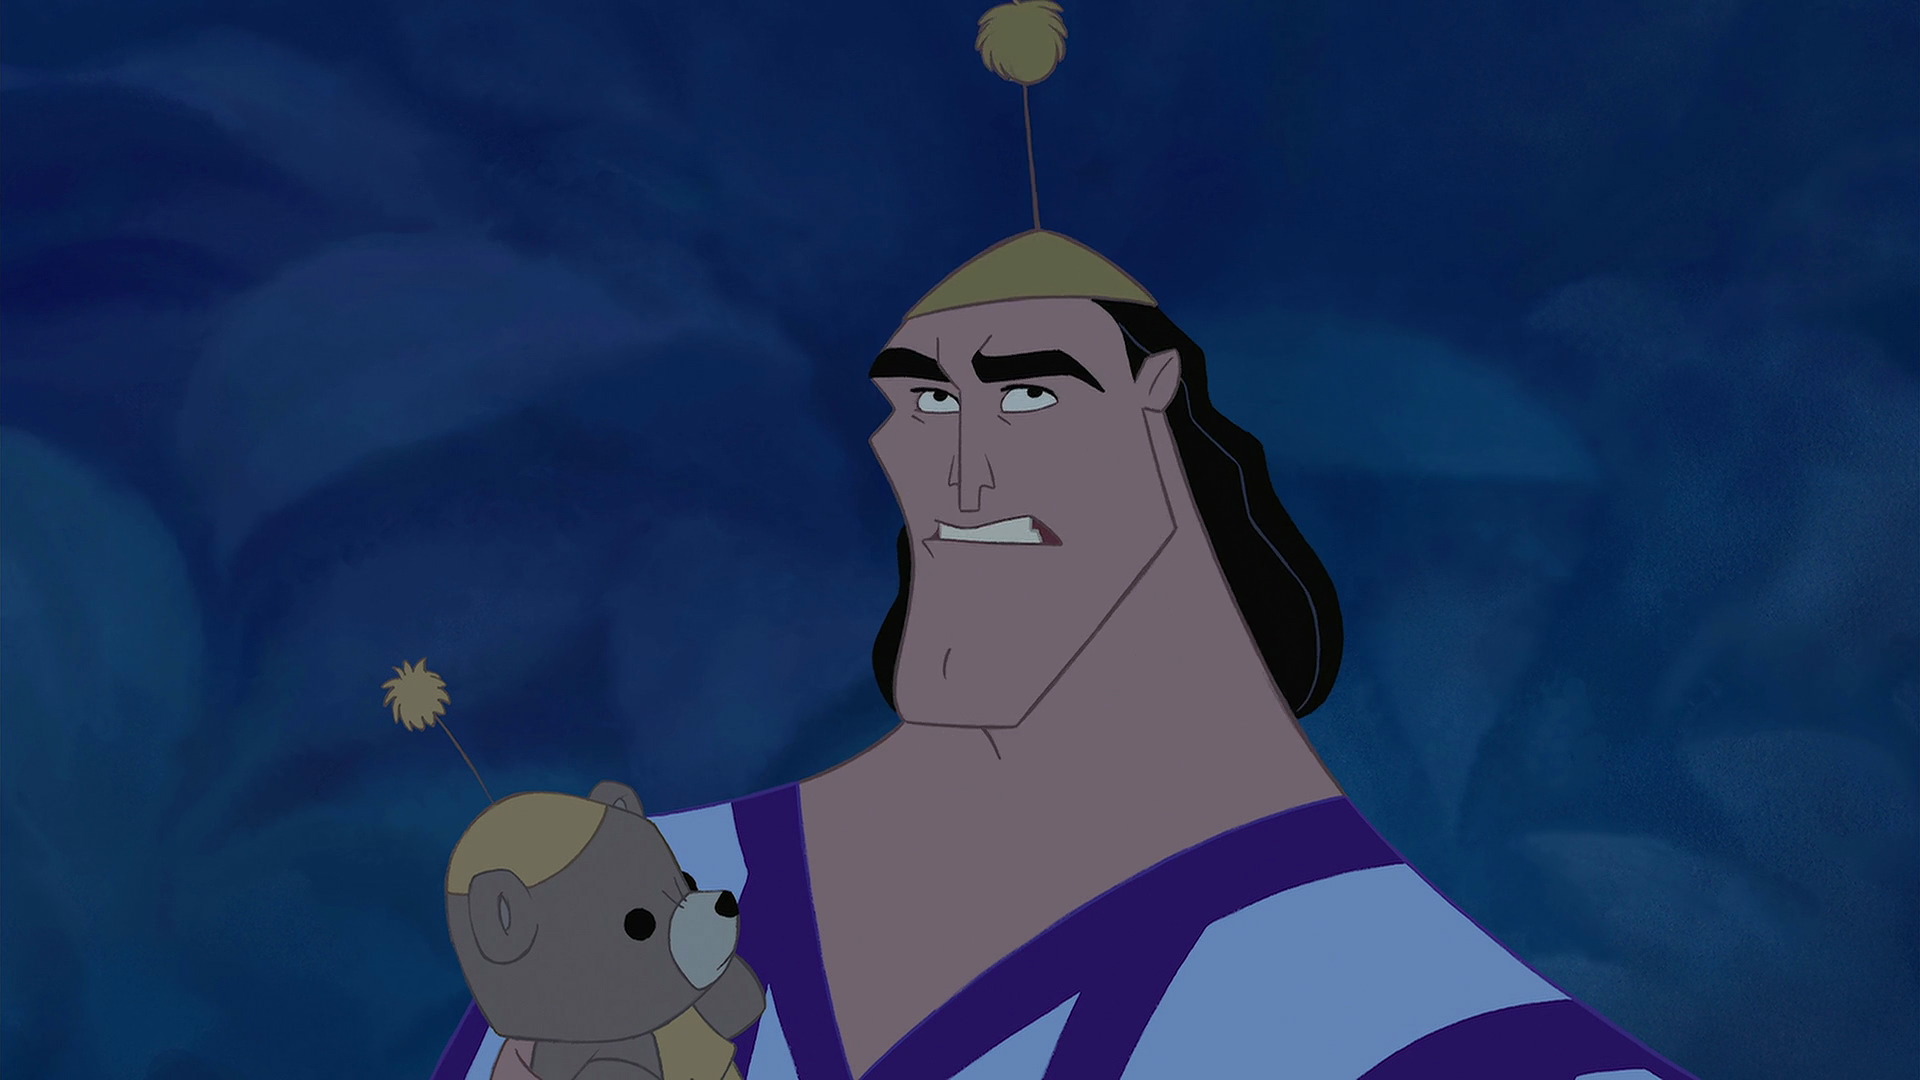 Kronk talks about the cheque.